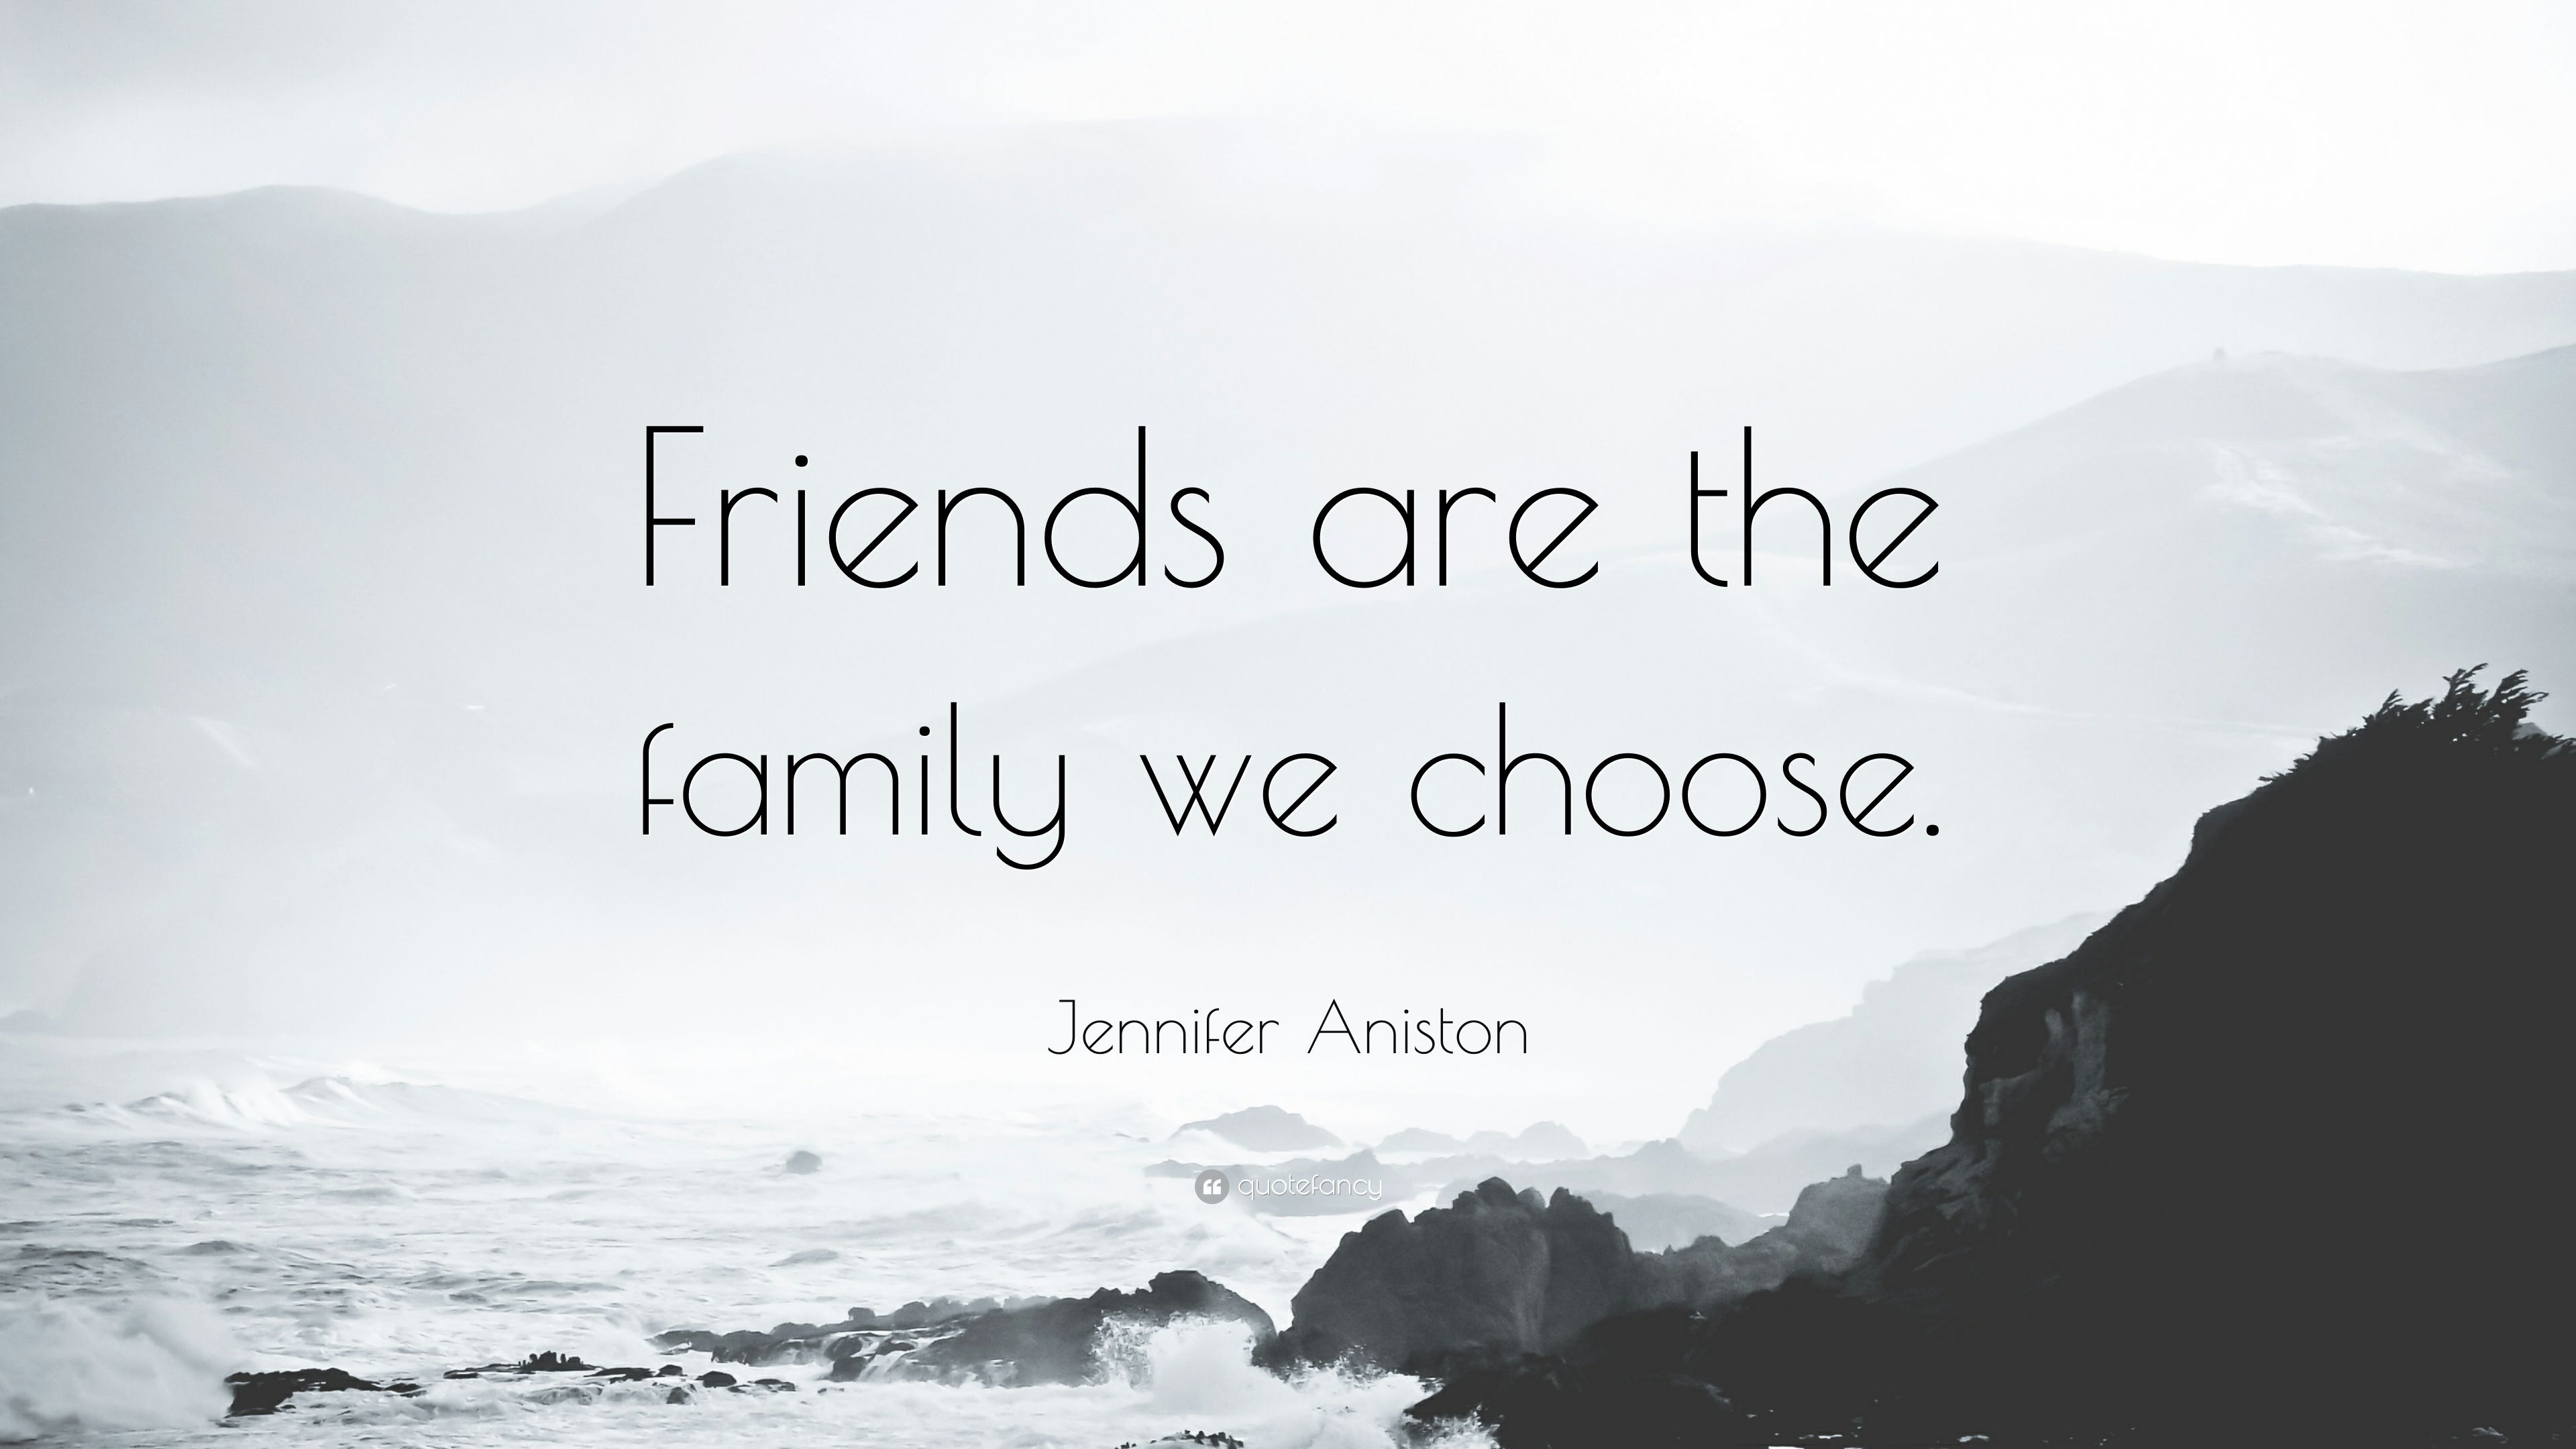 Jennifer Aniston Quote: “Friends are the family we choose.” 7